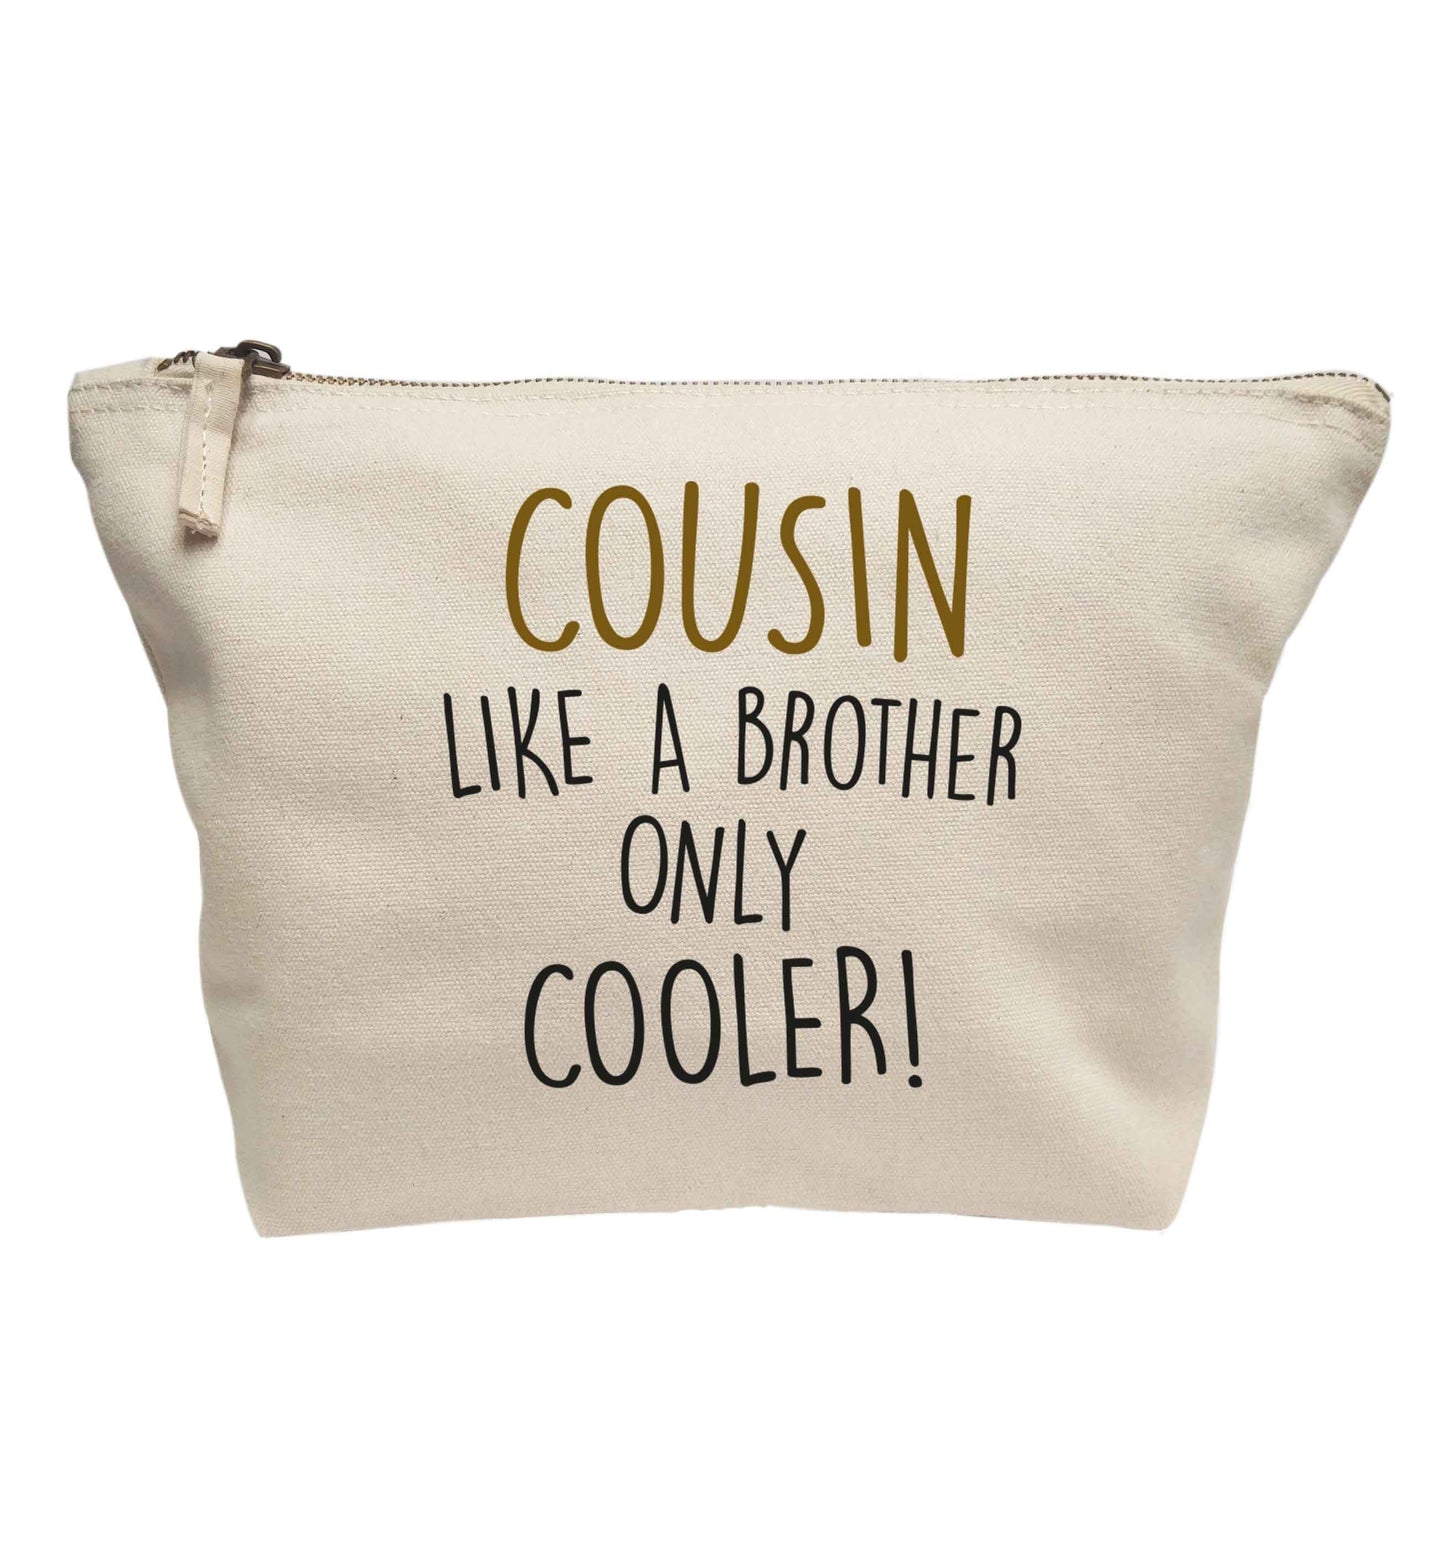 Cousin like a brother only cooler | Makeup / wash bag